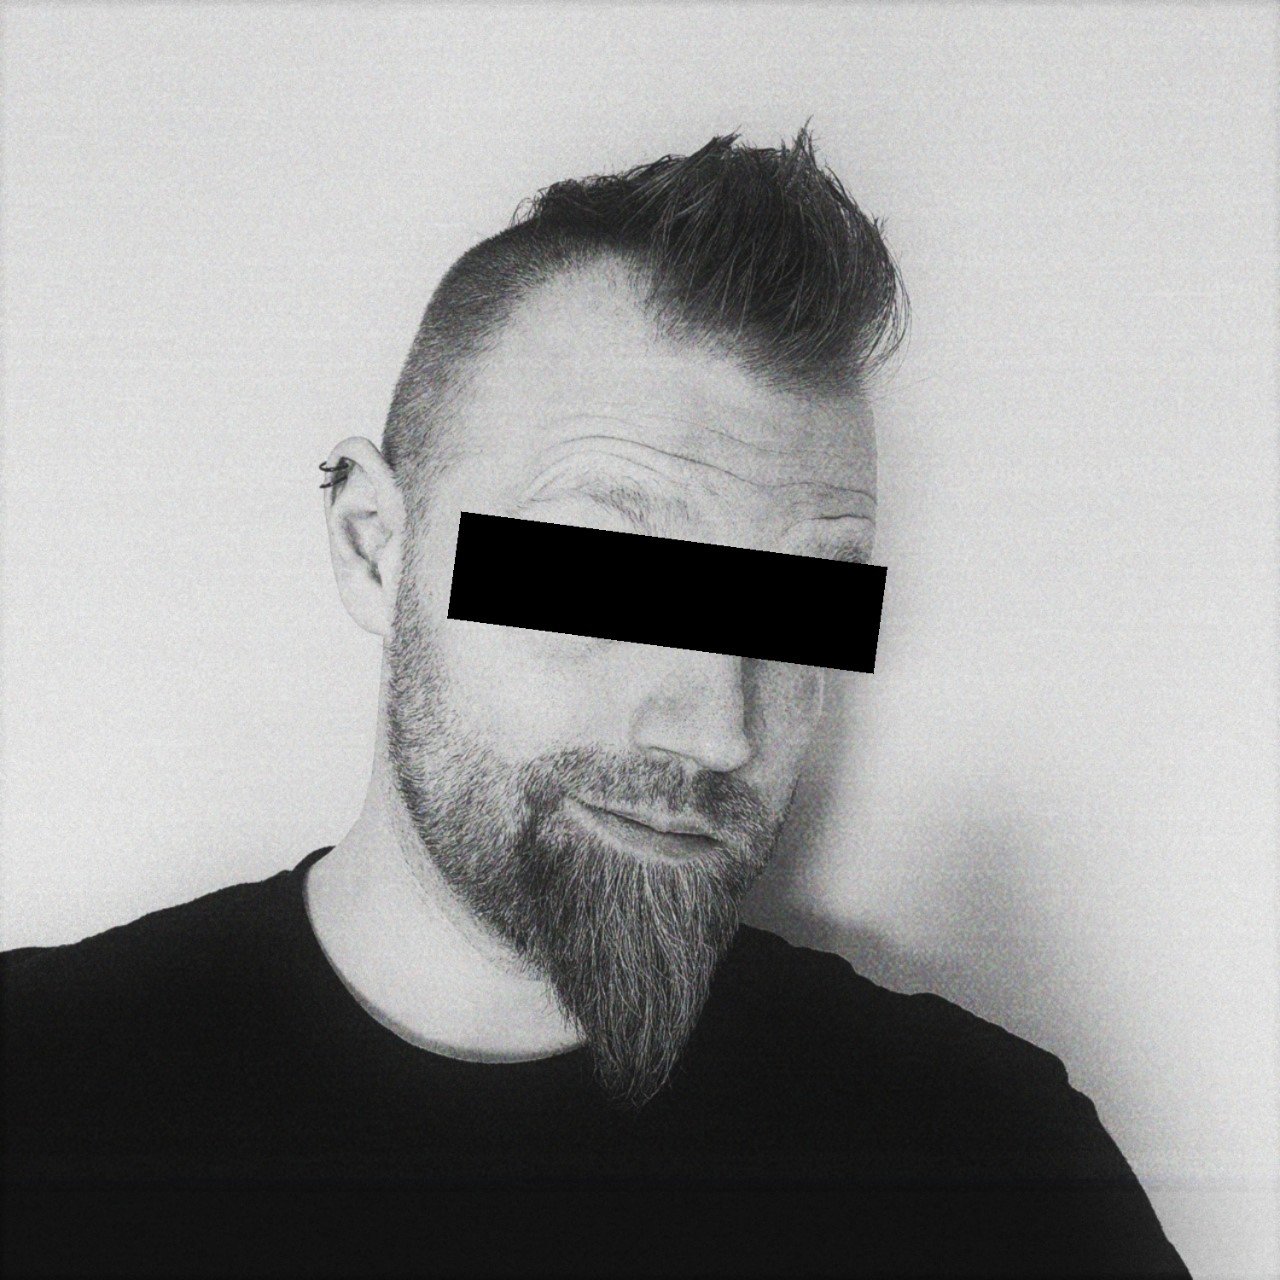 A black and white grainy photo of Myles's head and shoulders. He has a long pointy beard and a mohawk, with a black censored bar across his eyes